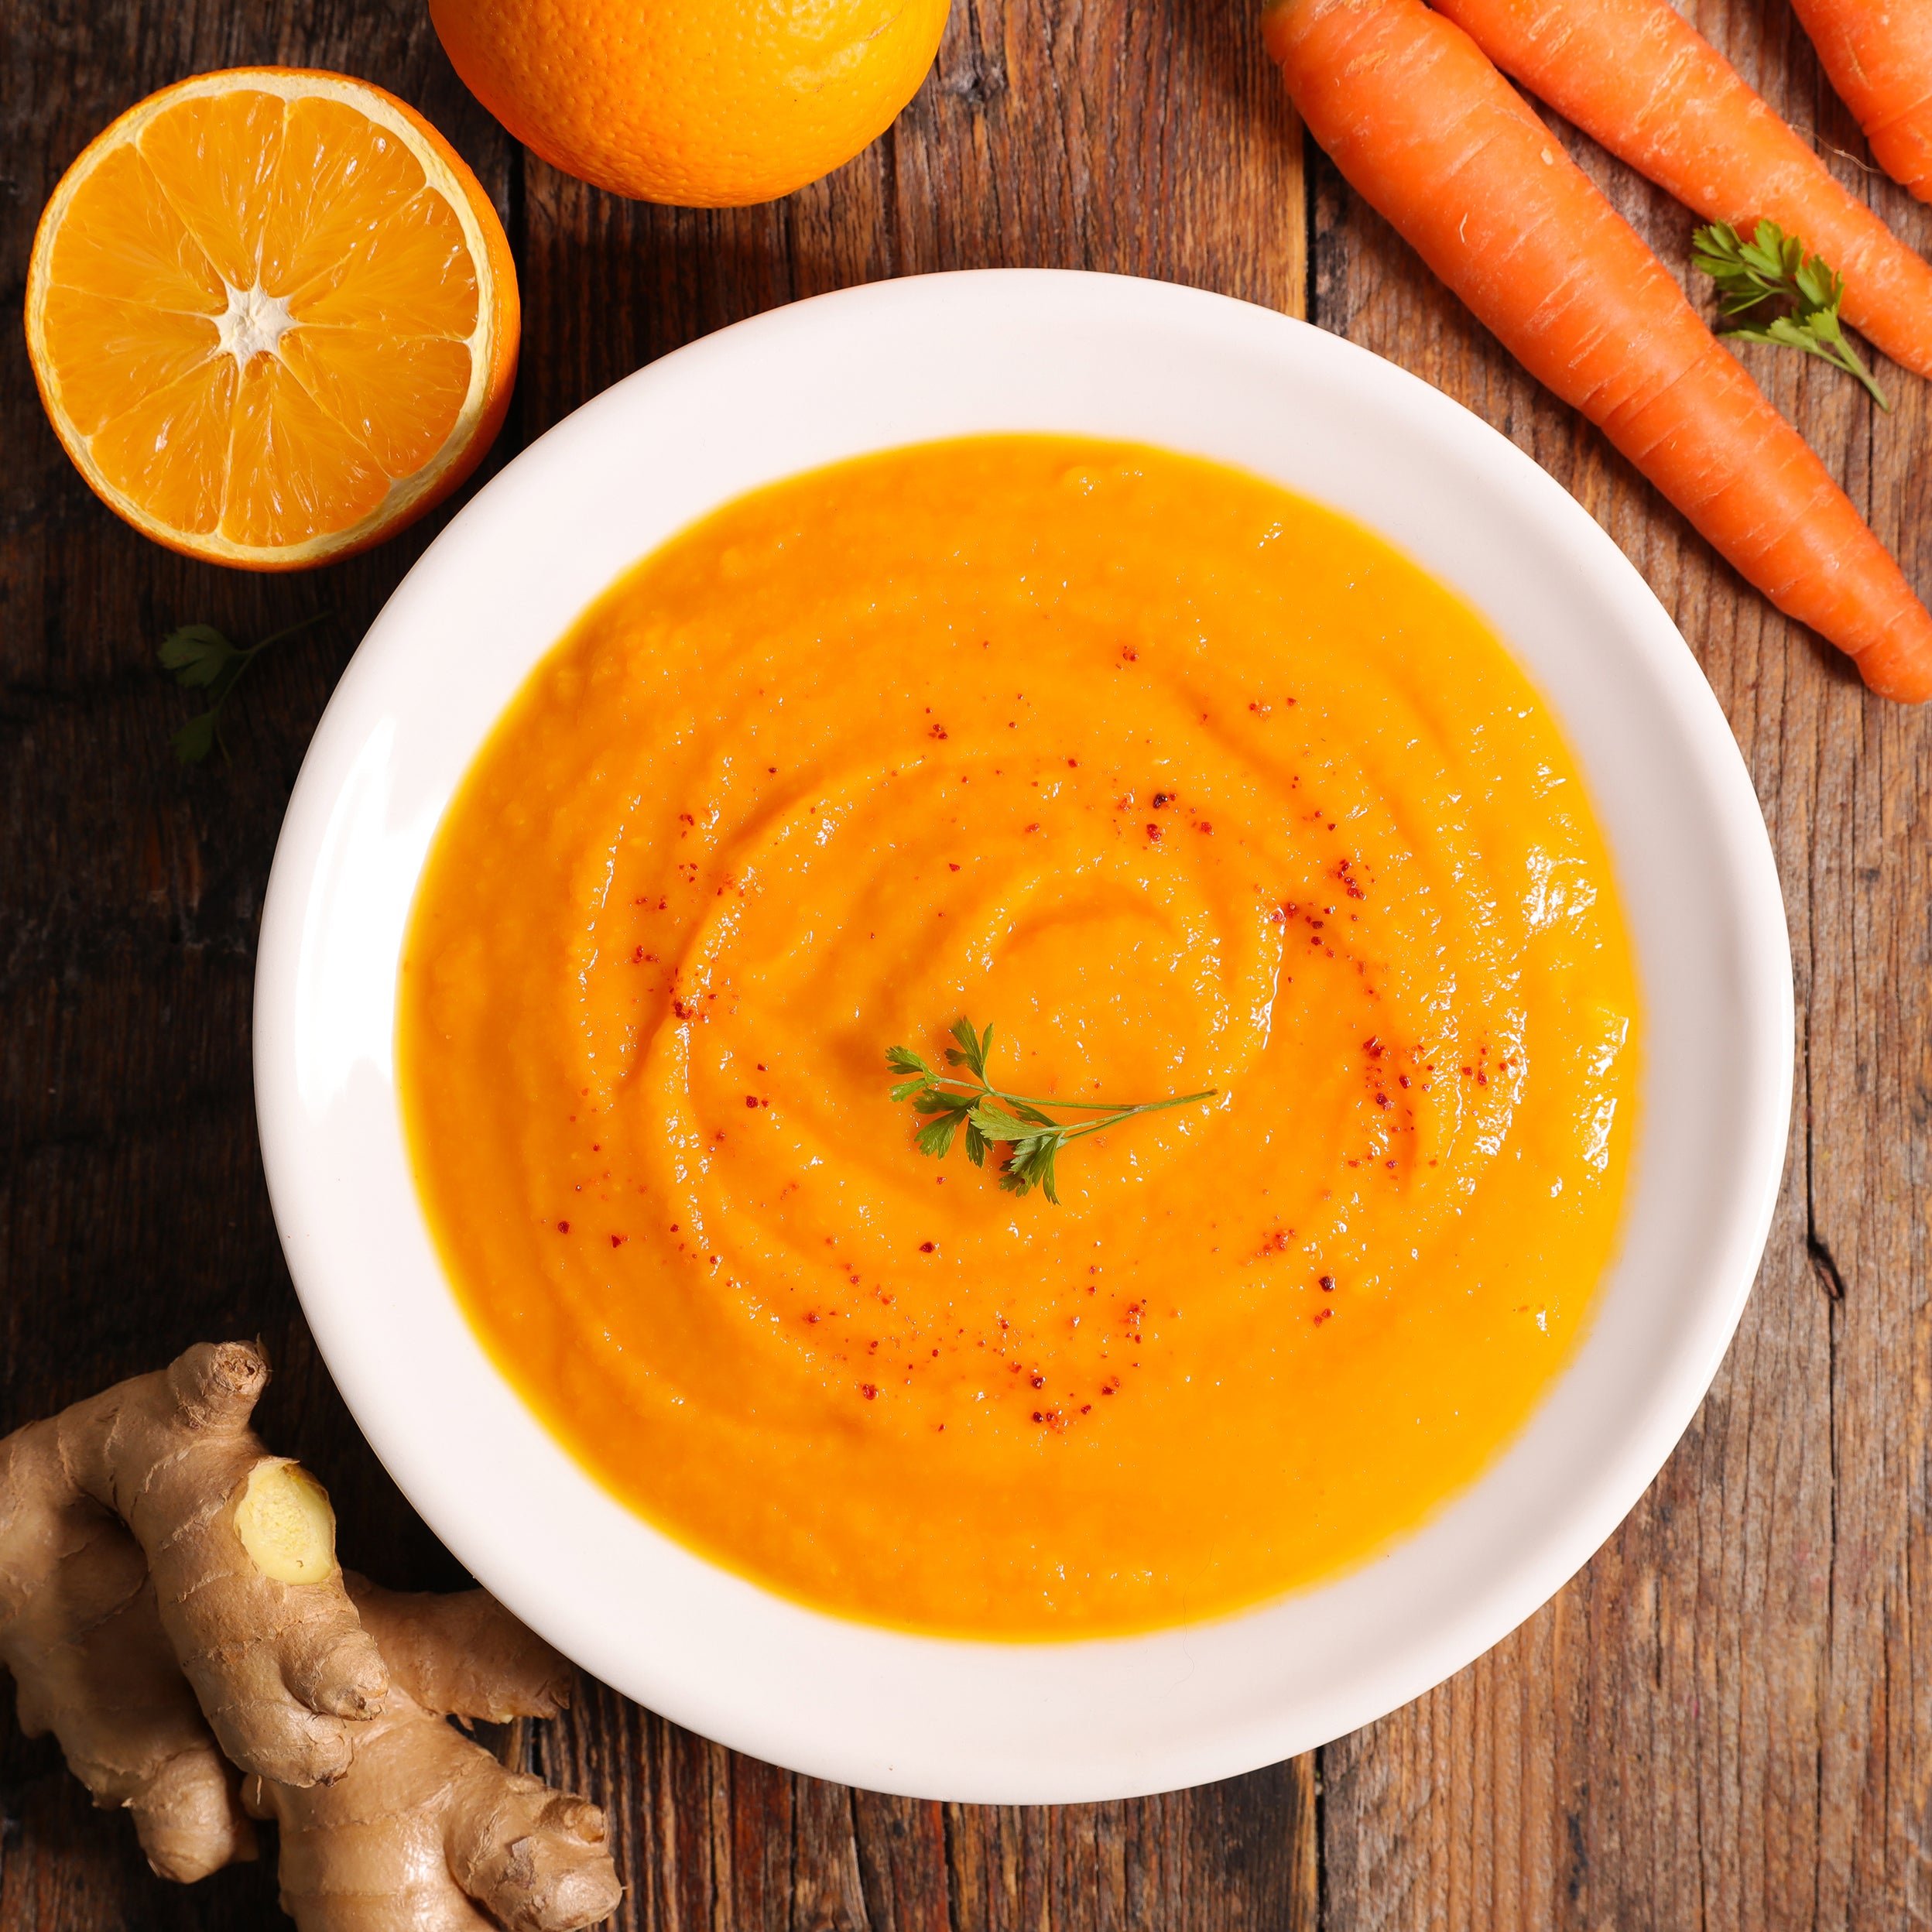 Carrot soup is a creamy soup made with pureed carrots, onions, and chicken or vegetable broth.